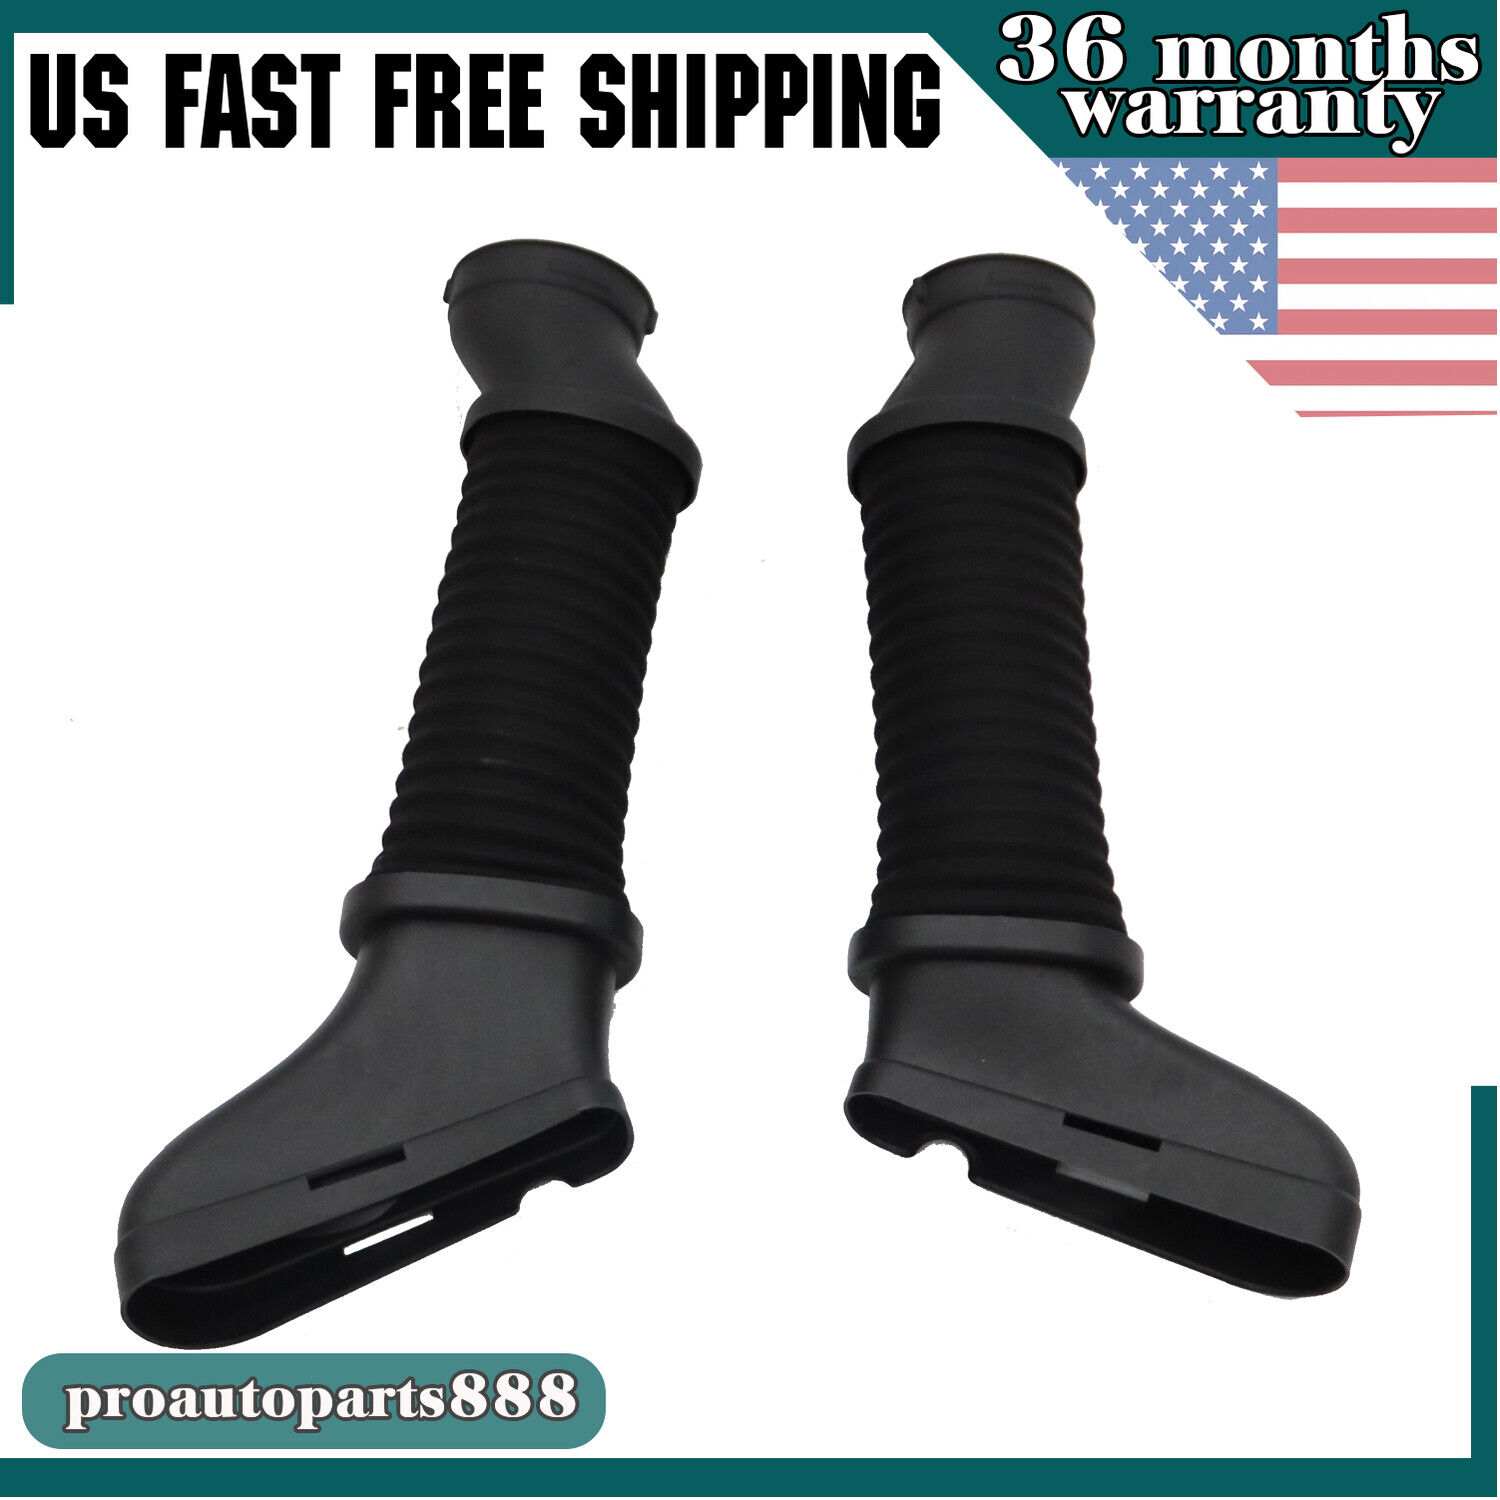 2 X Air Cleaner intake Duct Hose Pair LH & RH For 12-17 Benz E550 Cls550 E63 AMG